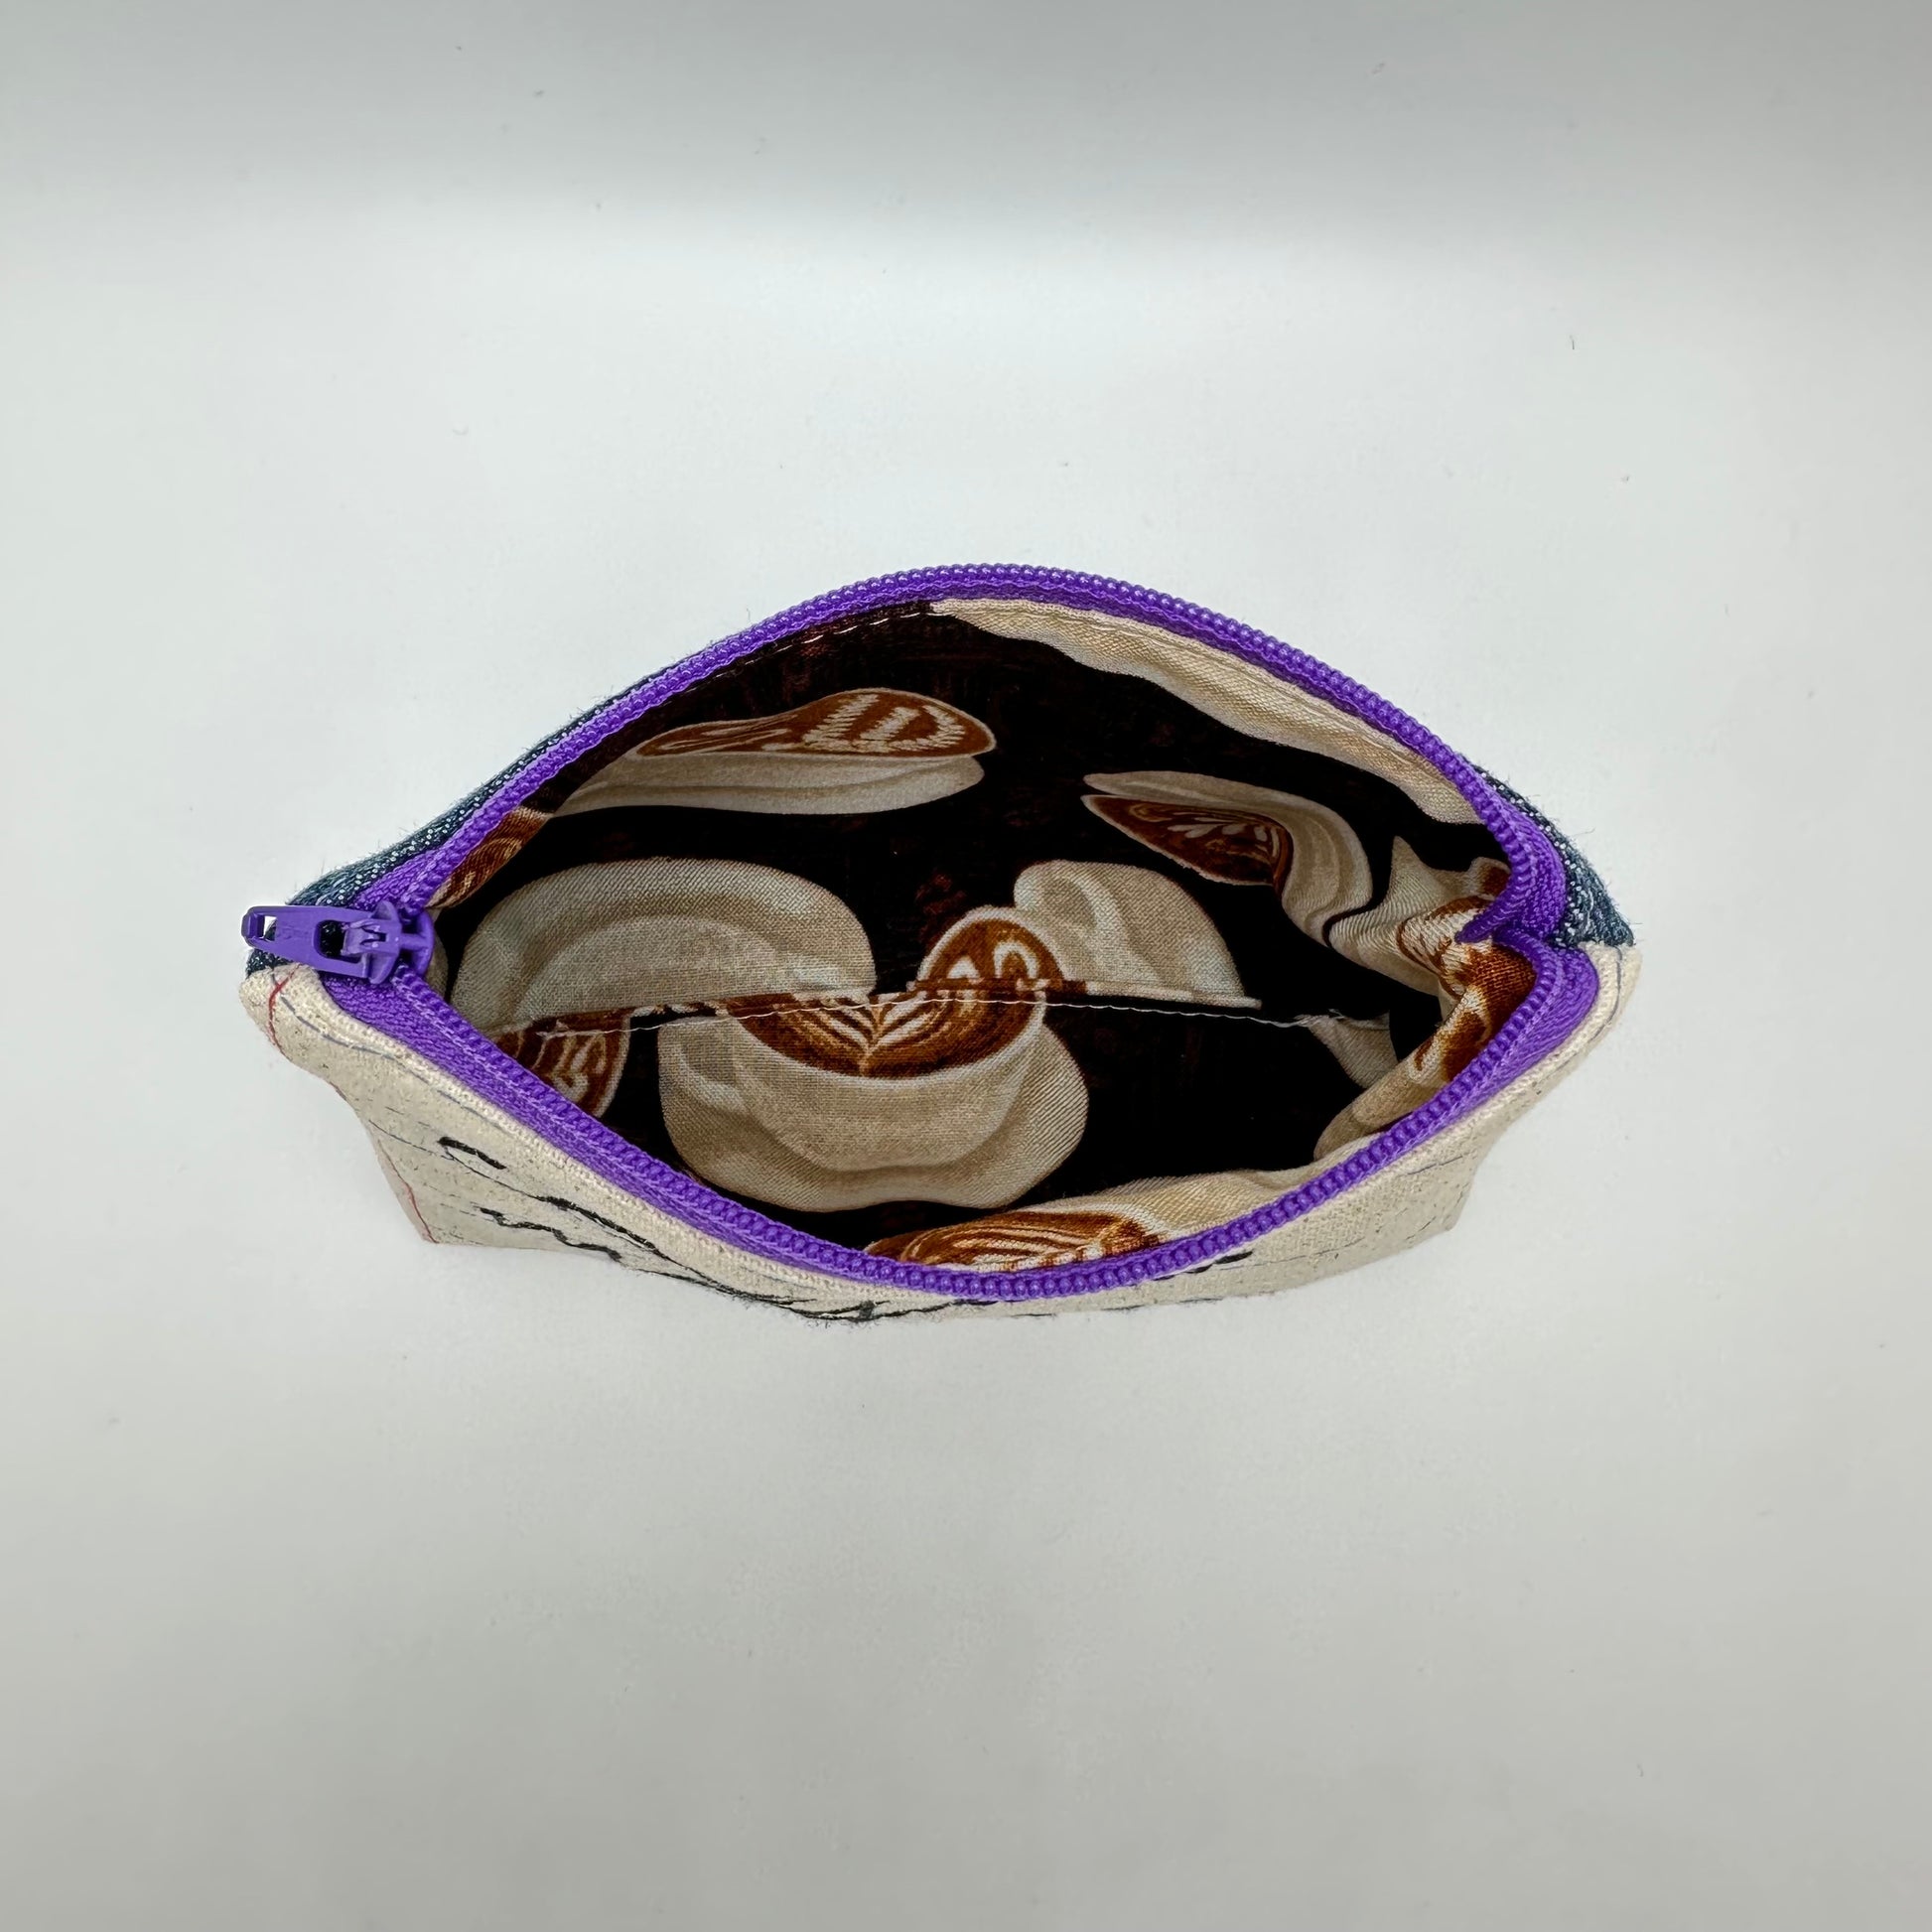 Inside of pouch showing fabric of a. coffee latte pattern.